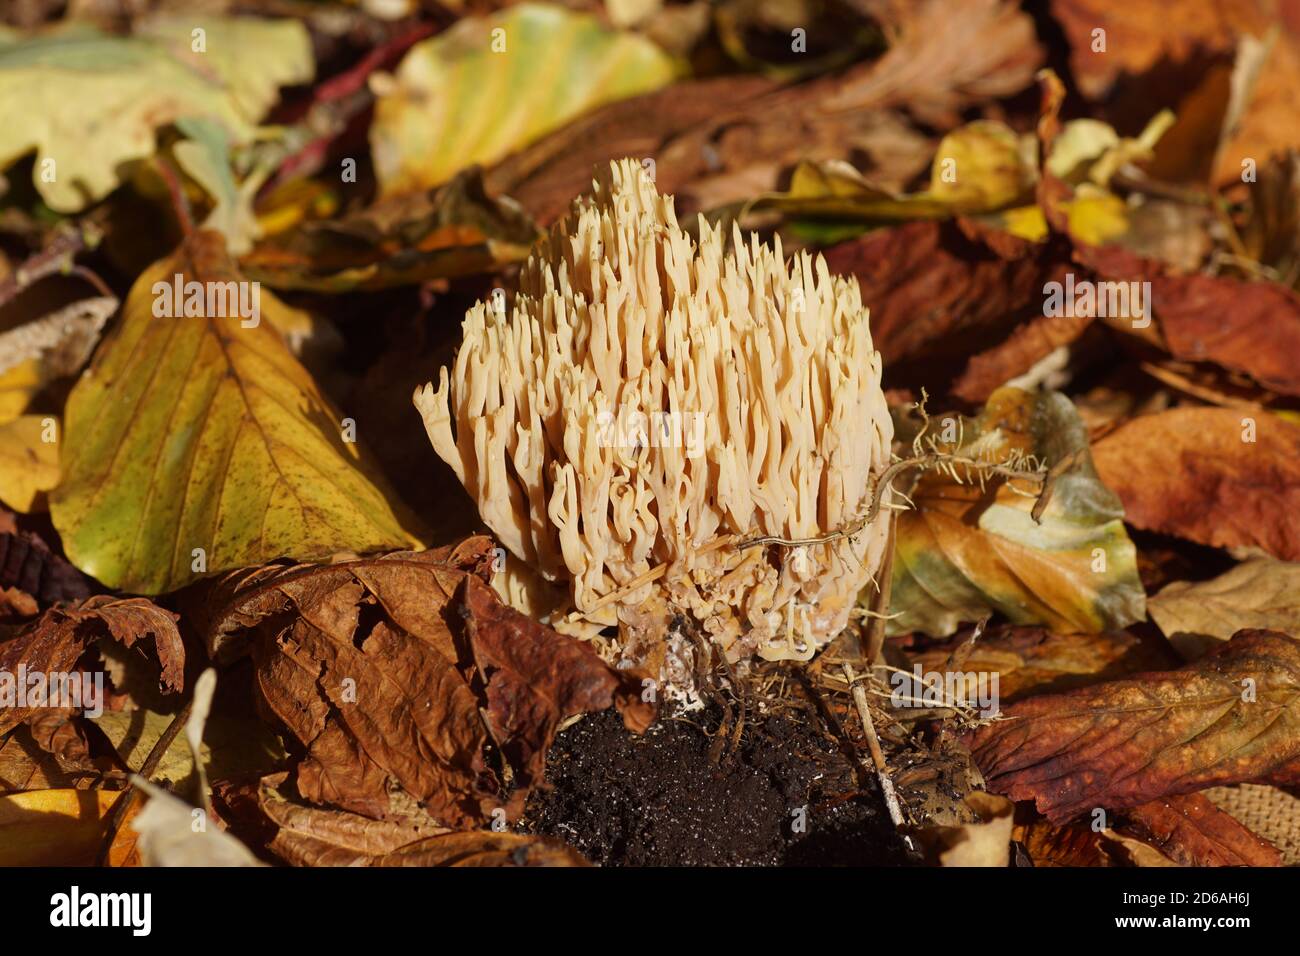 Strict-branch coral (Ramaria stricta) a coral fungus of the family Gomphaceae in a Dutch garden in Autumn. Netherlands, October Stock Photo